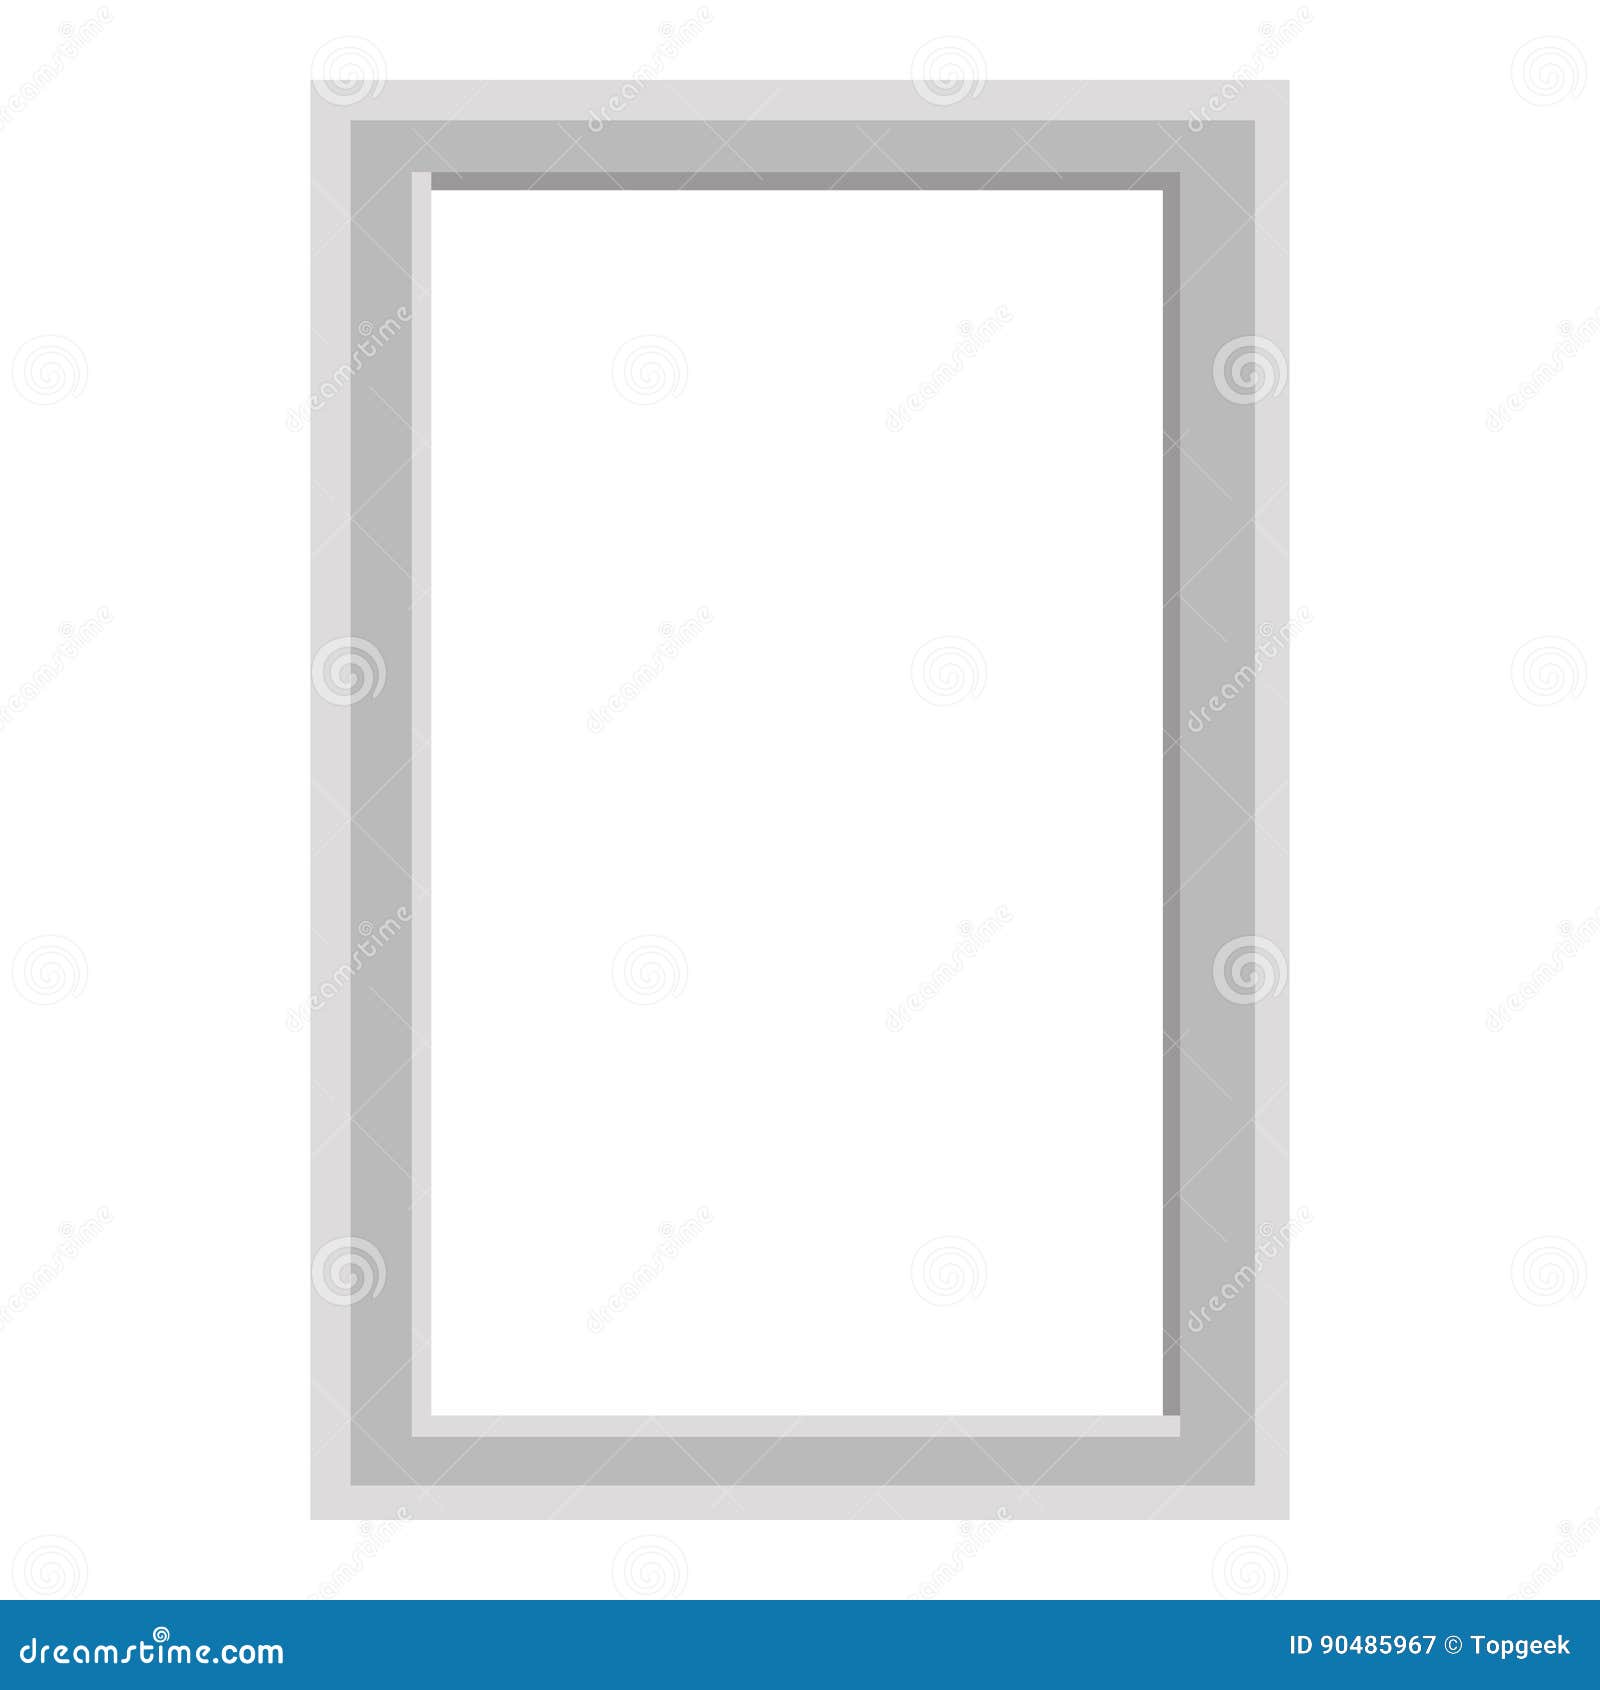 Featured image of post Background Plain White Square / Choose from over a million free vectors, clipart graphics, vector art images, design templates, and illustrations created by artists worldwide!